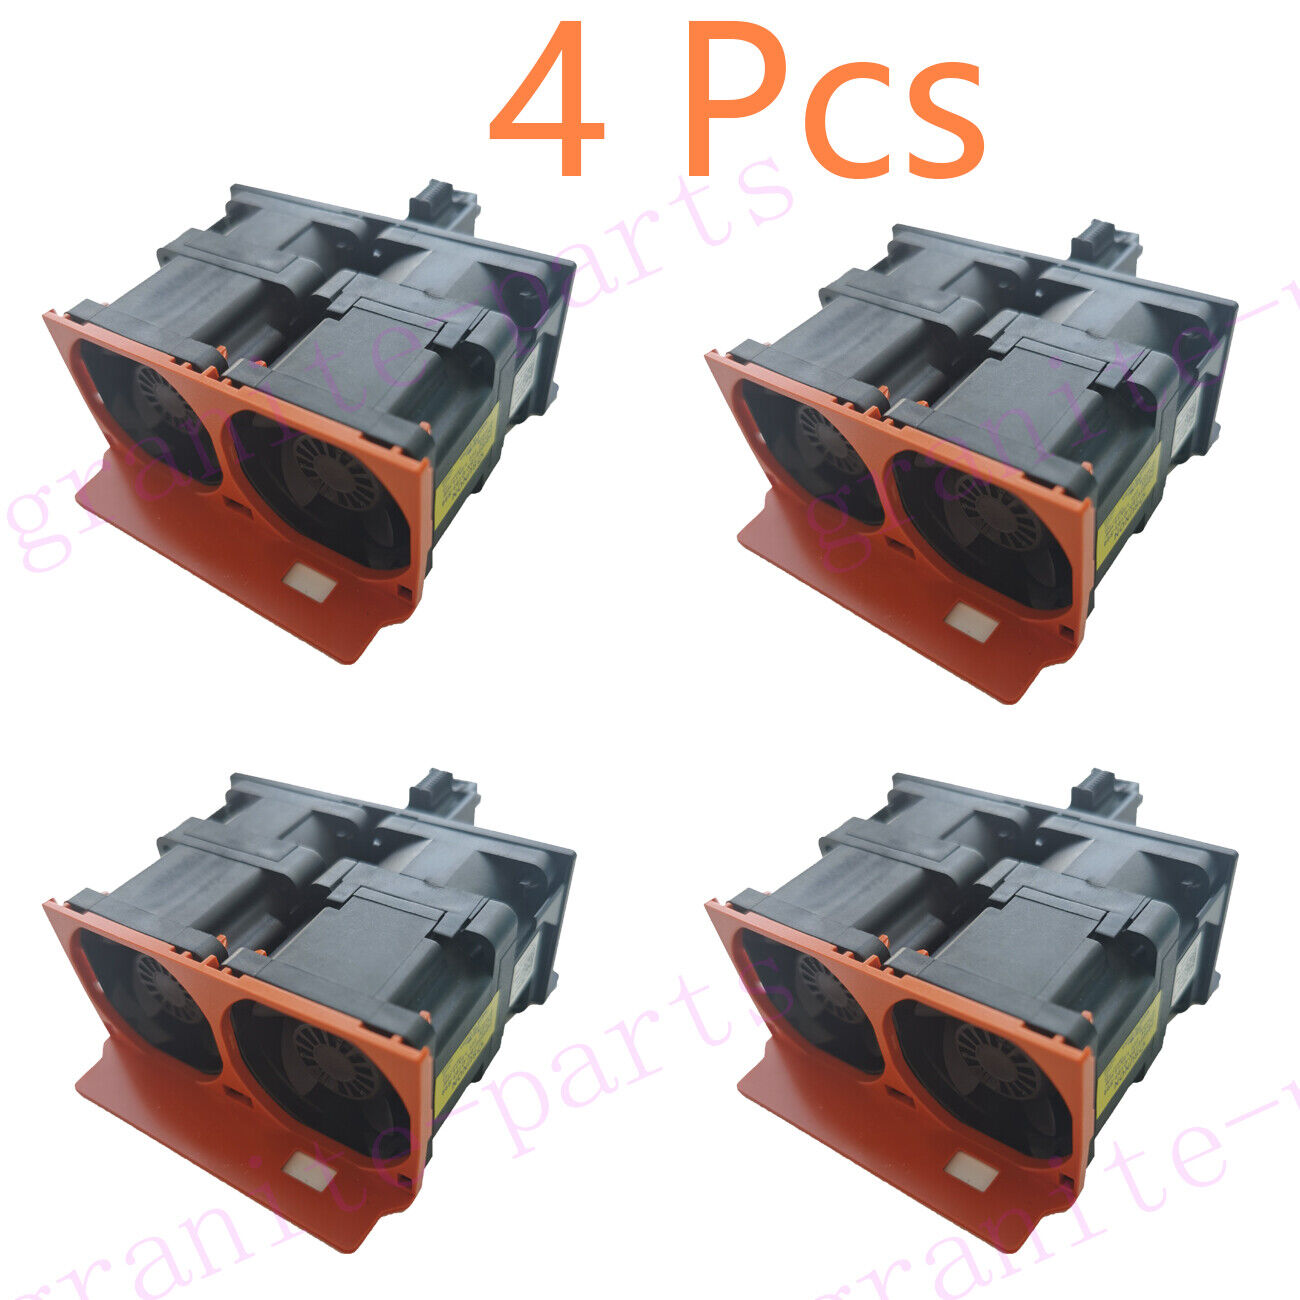 4 Pcs For Dell R650 R6525 R6515 2.5A Gold Grade High Performance Cooling Fan US